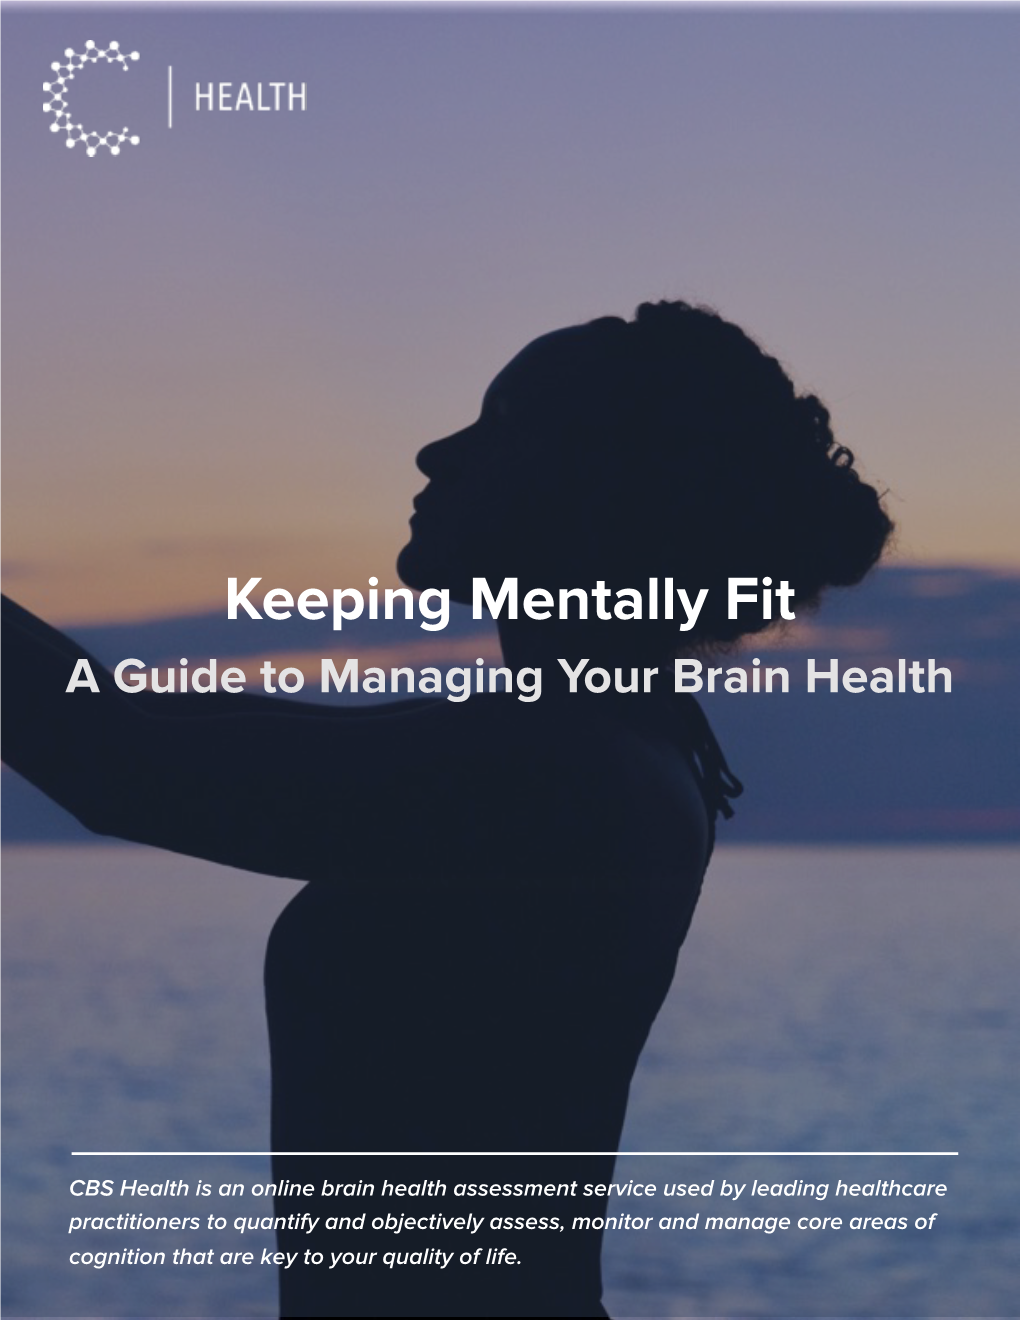 Guide to Managing Brain Health